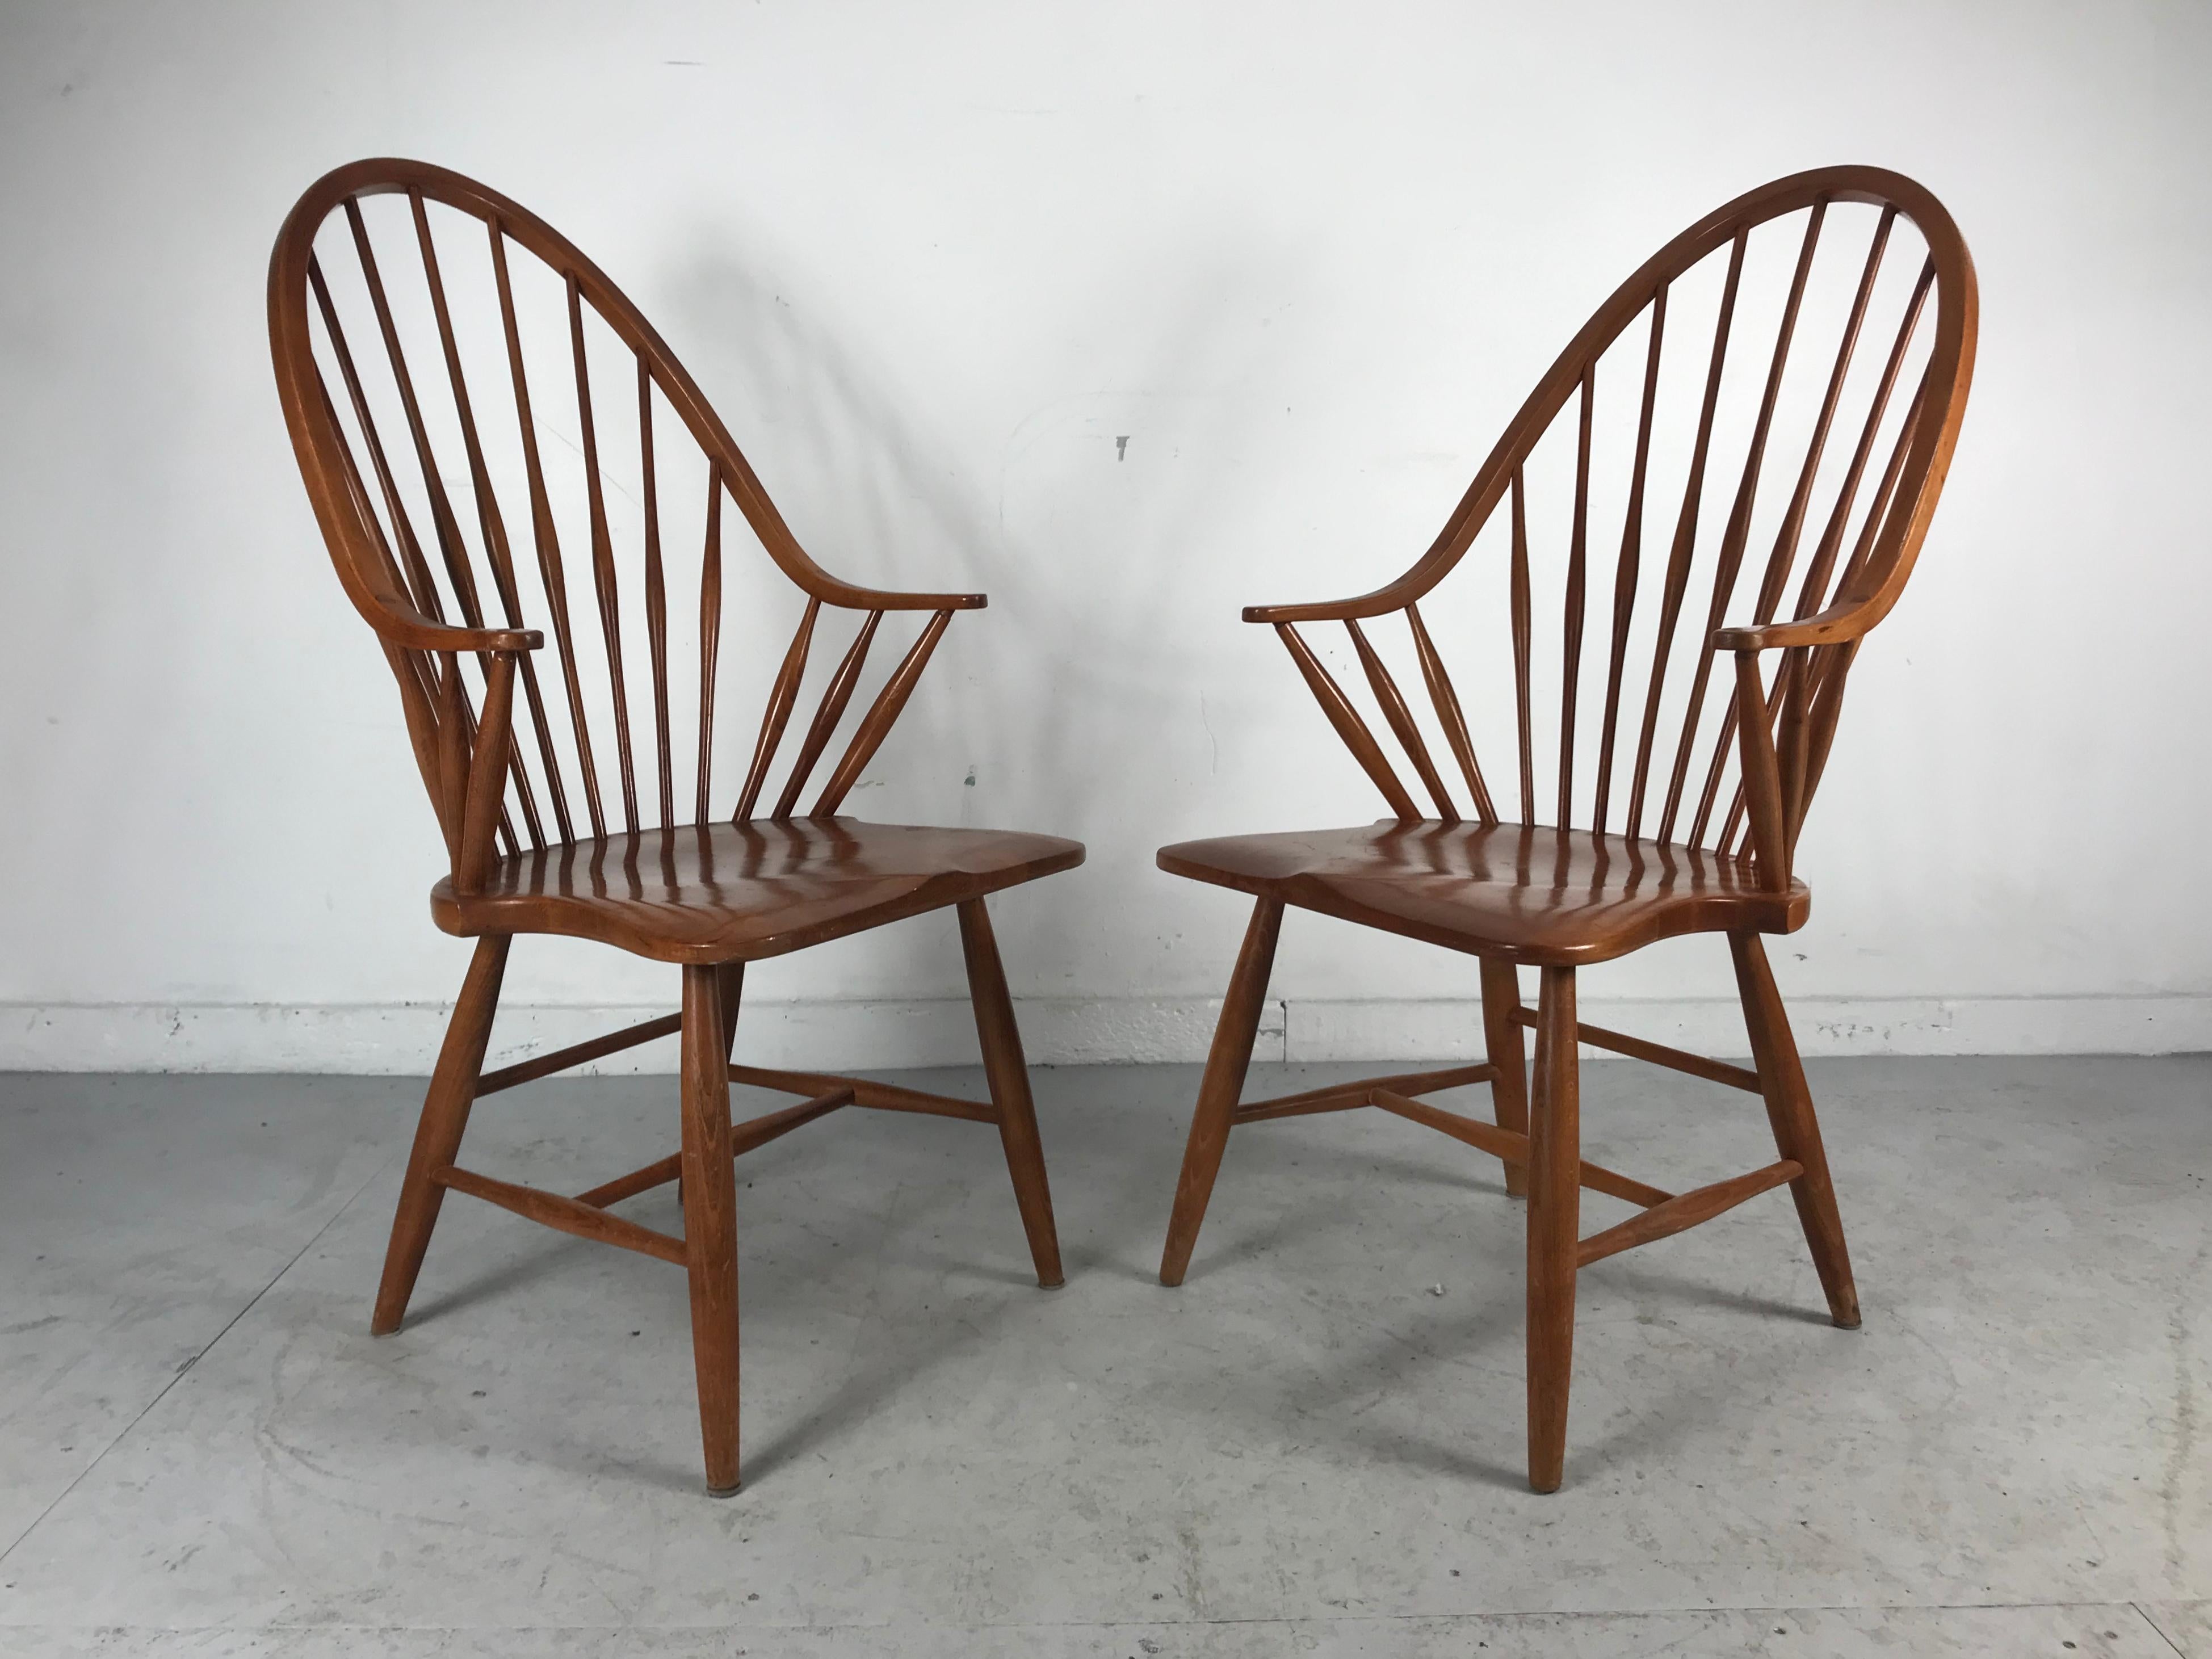 Danish Pair of Modernist Tall Spindle Back Windsor Chairs